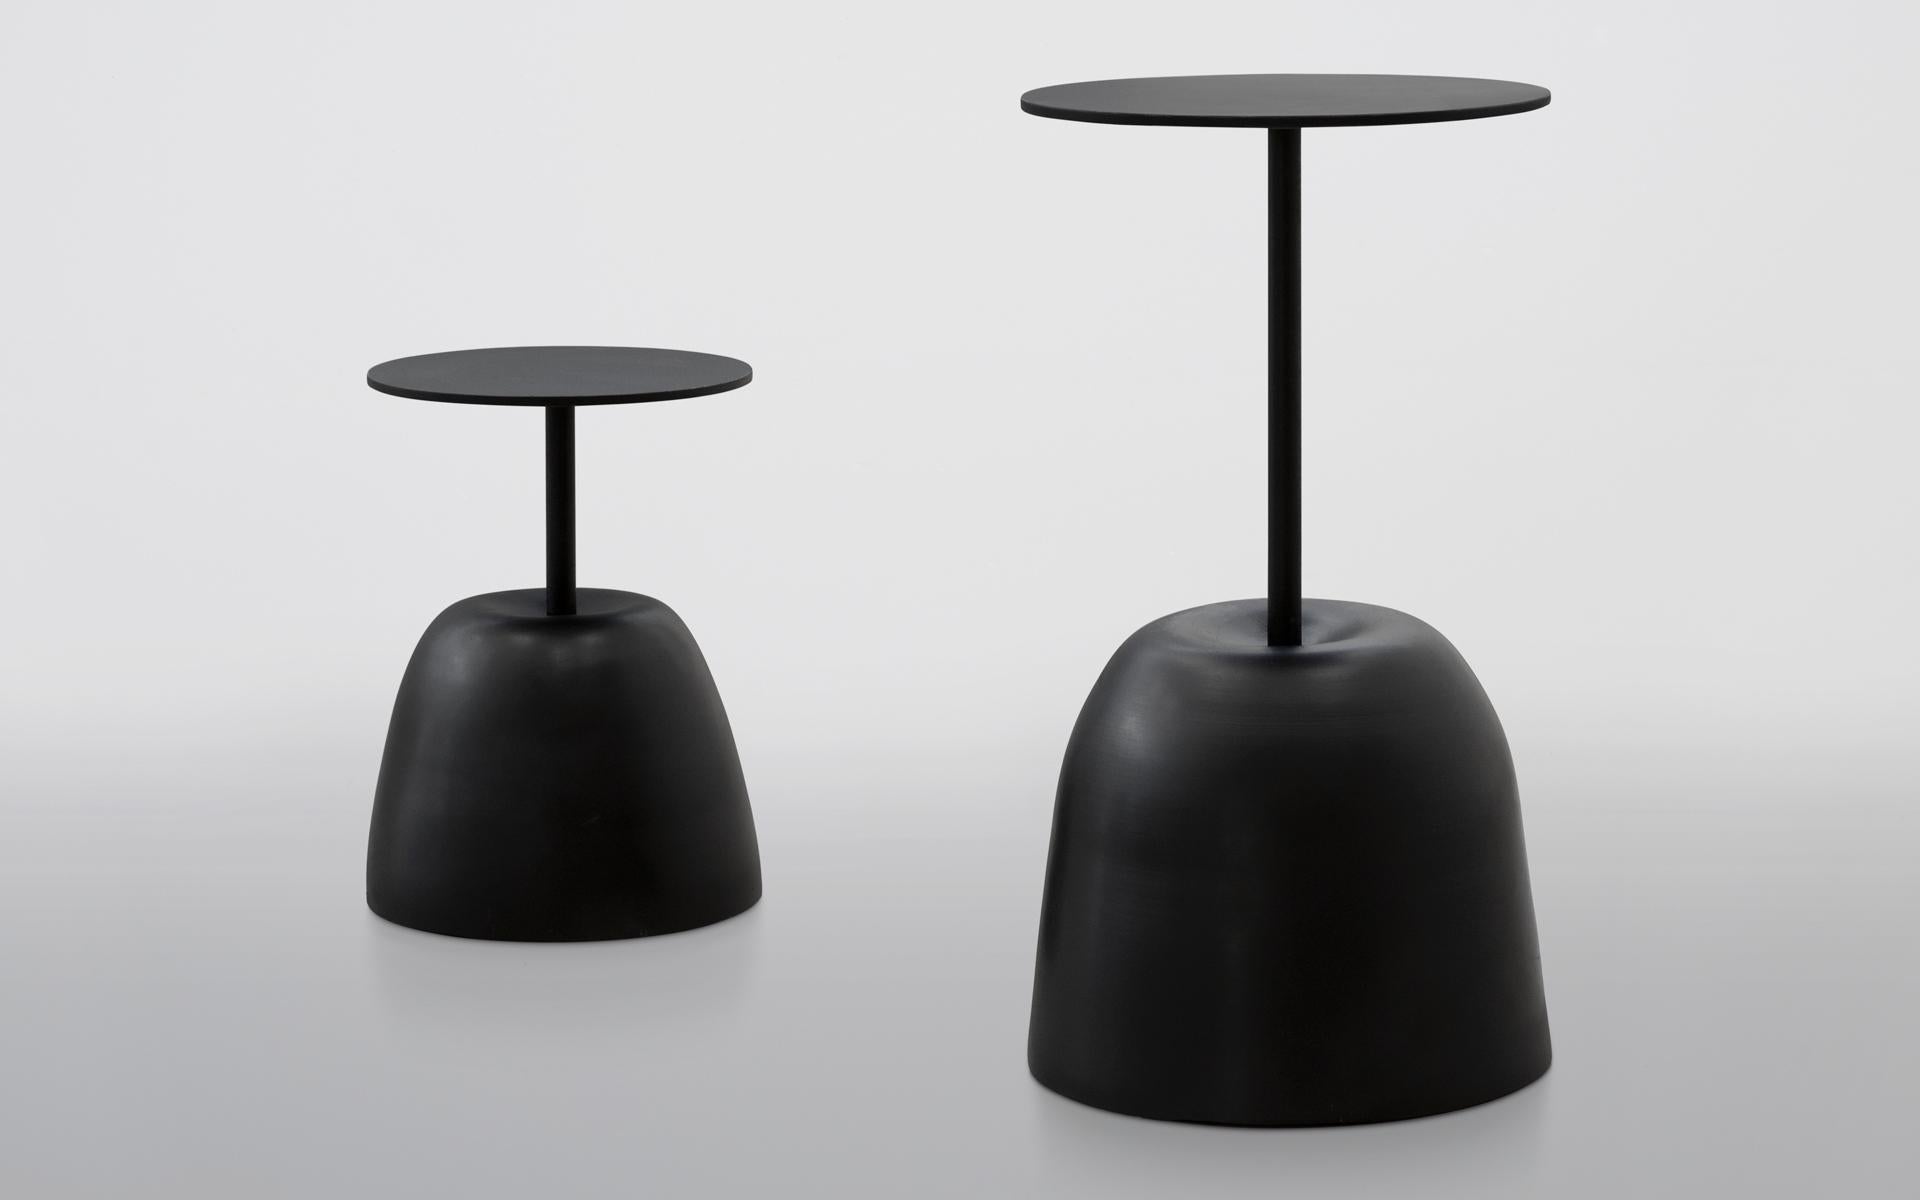 Pair of Basalto table by Imperfettolab
Dimensions:
37 x H 51 cm
44 x H 80 cm
Materials: Fiberglass

Imperfetto Lab
Who we are ? We are a family.
Verter Turroni, Emanuela Ravelli and our children Elia, Margherita and Eusebio.
All together,